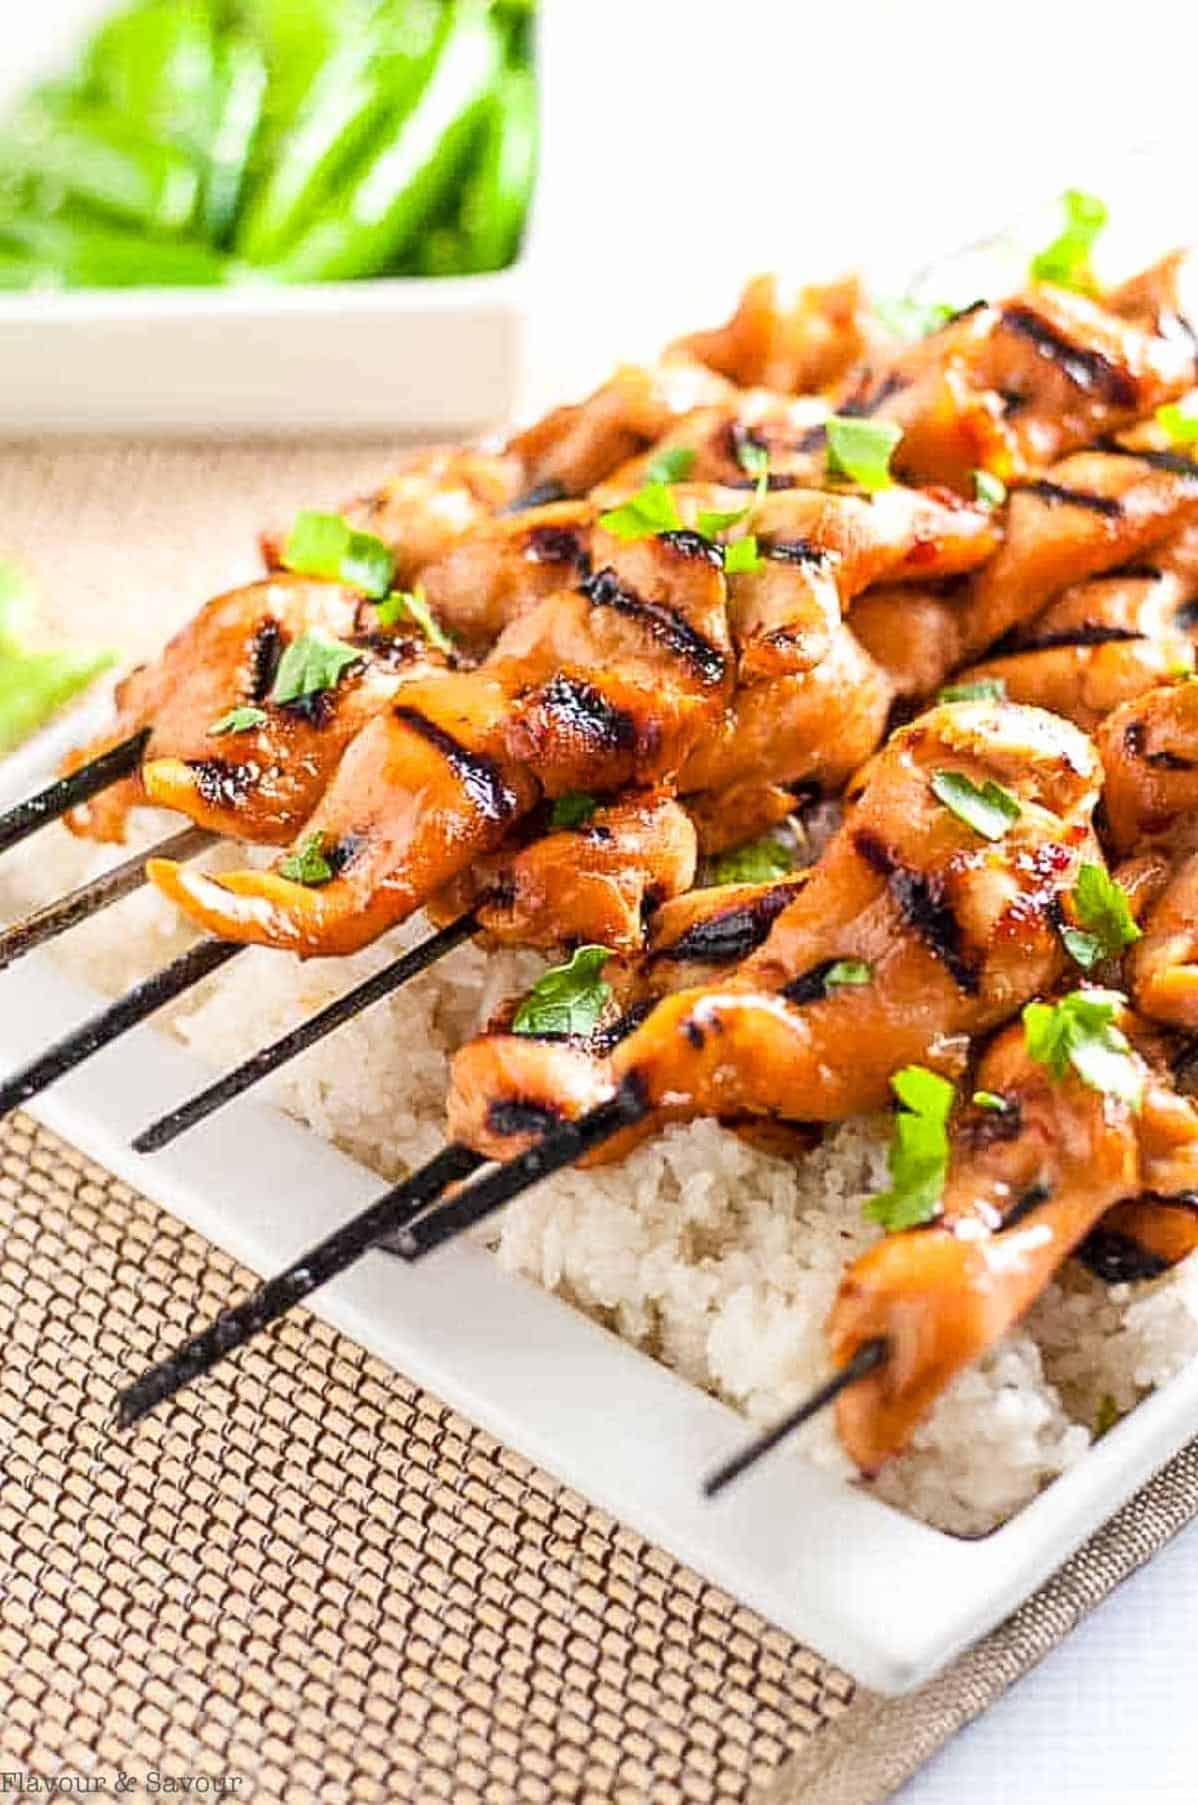  Make any gathering a little more exotic with these Thai-style skewers